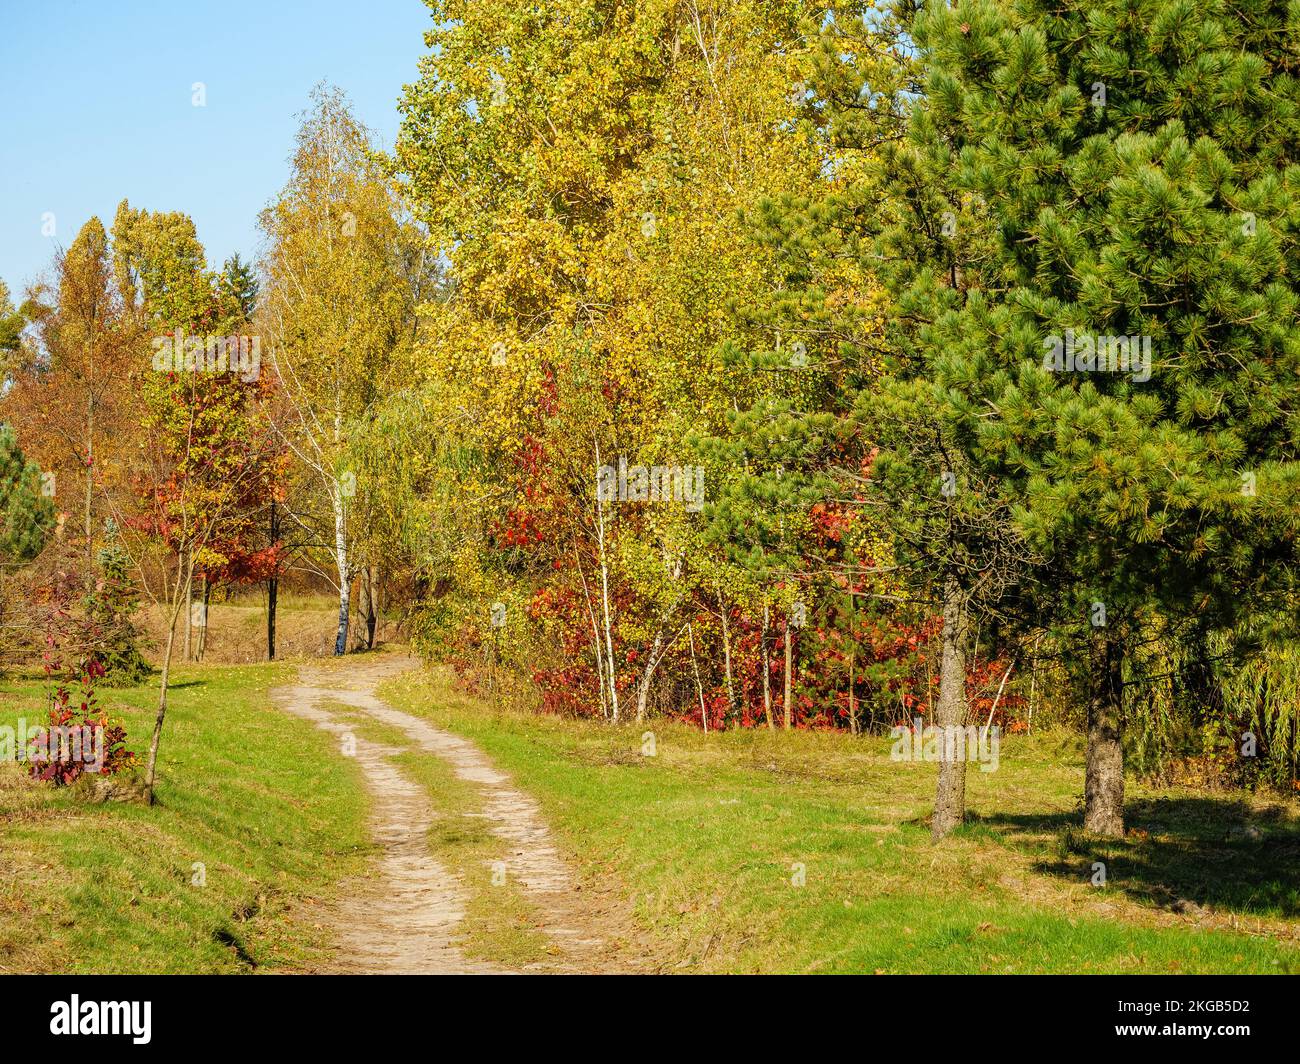 A dirt road through the autumn forest curves in front of a thuja under a pine tree Stock Photo